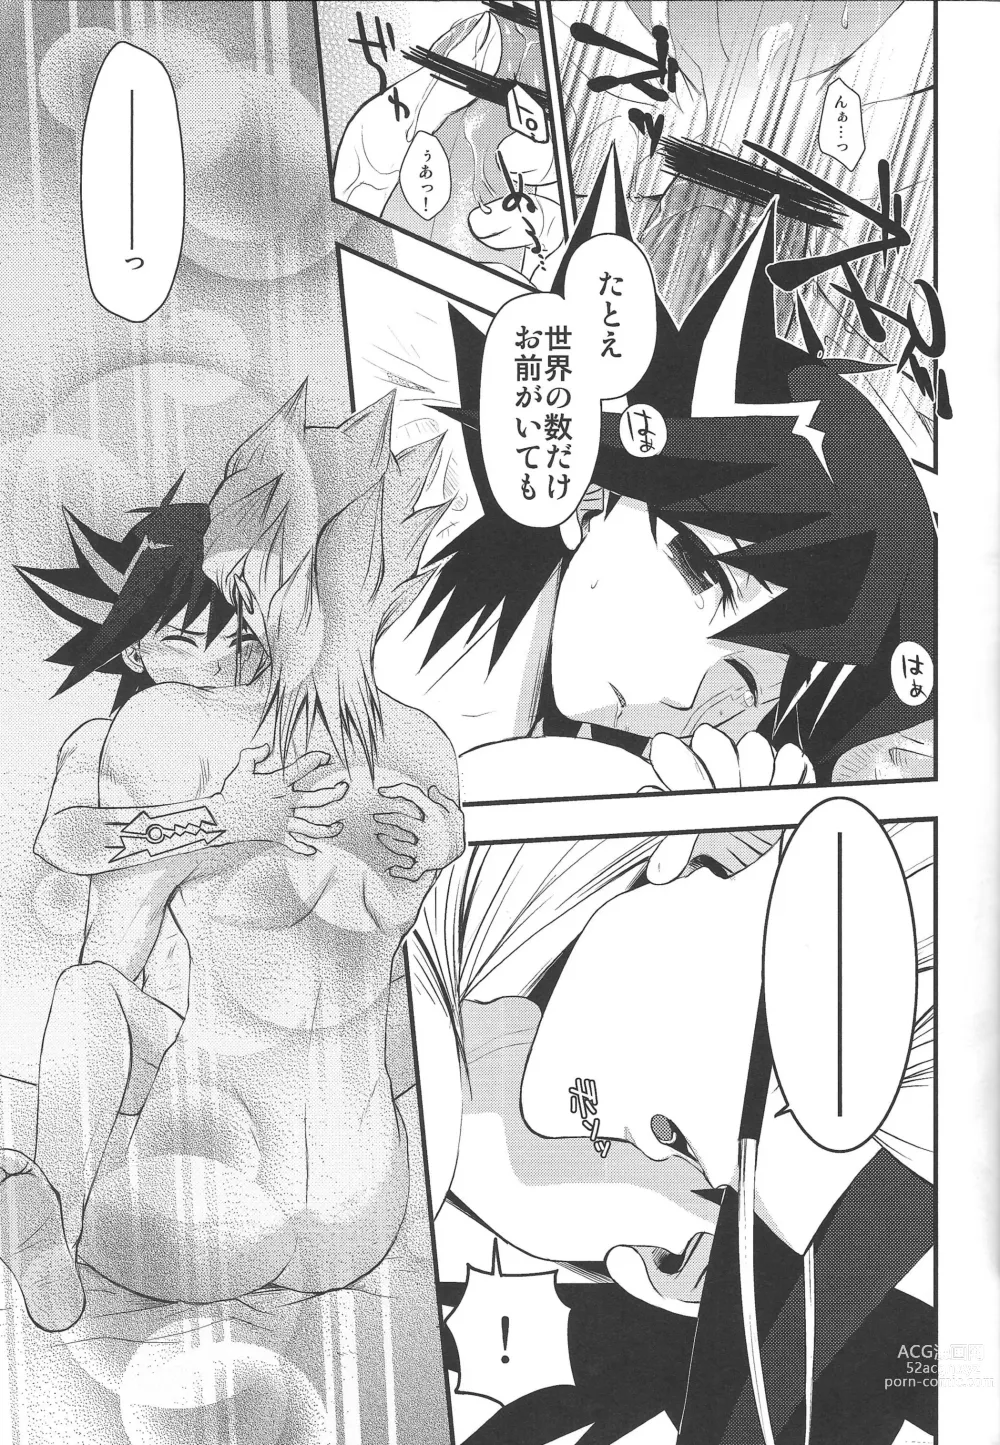 Page 24 of doujinshi Desire Child